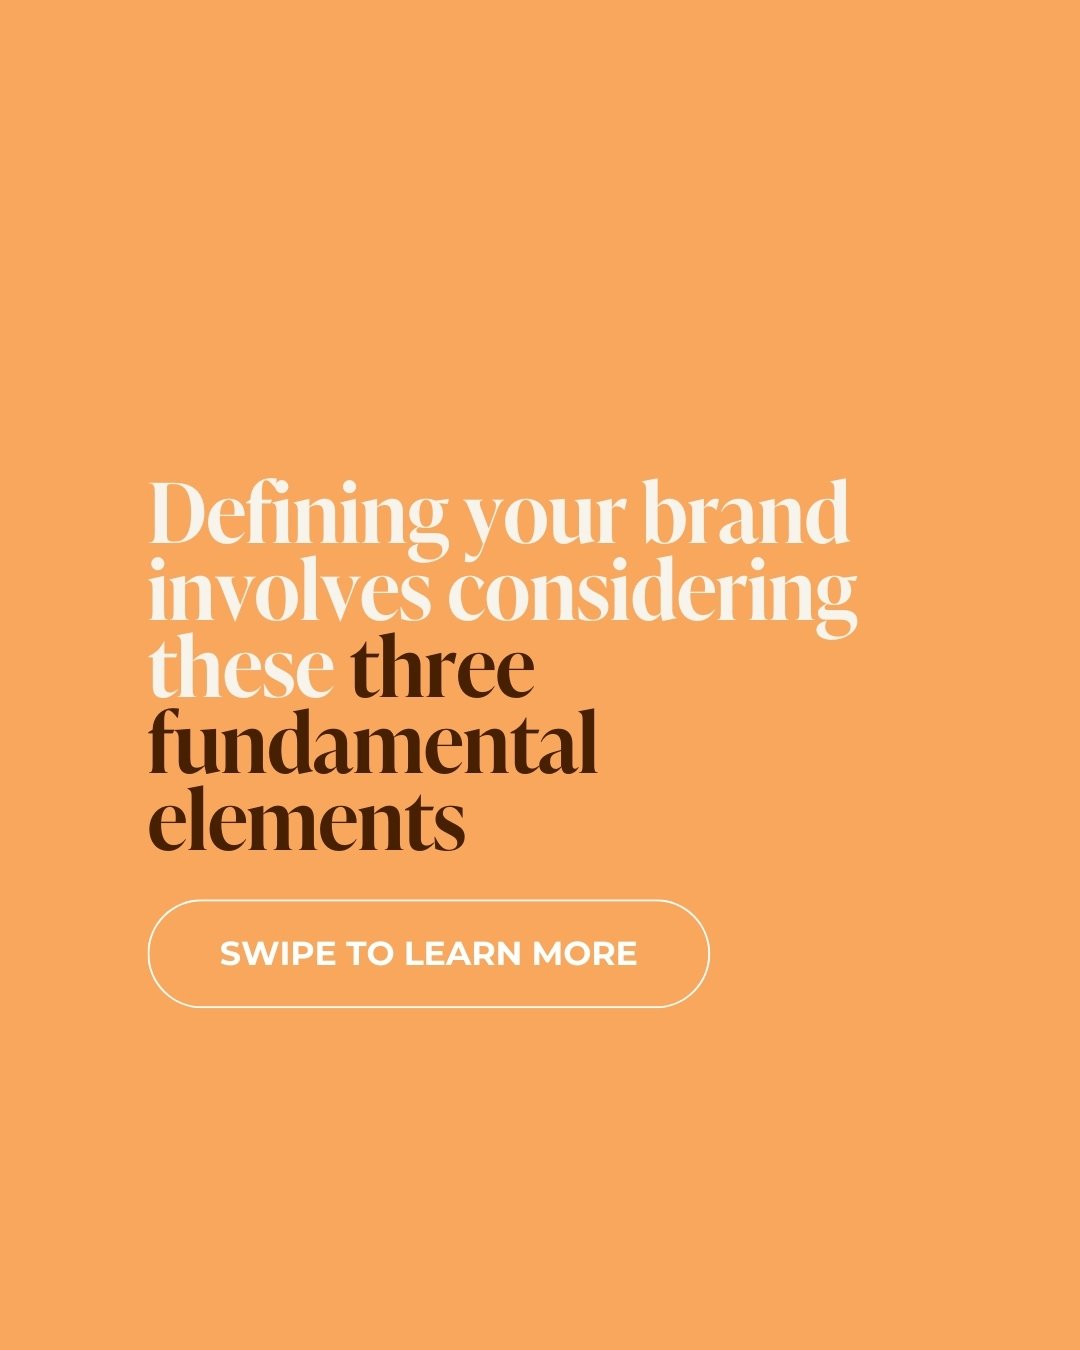 A strong brand is what separates the good from the great.

But how do you go beyond a catchy logo and craft a brand identity that truly resonates with your audience?

The answer lies in understanding the 3 fundamental elements that define your brand!